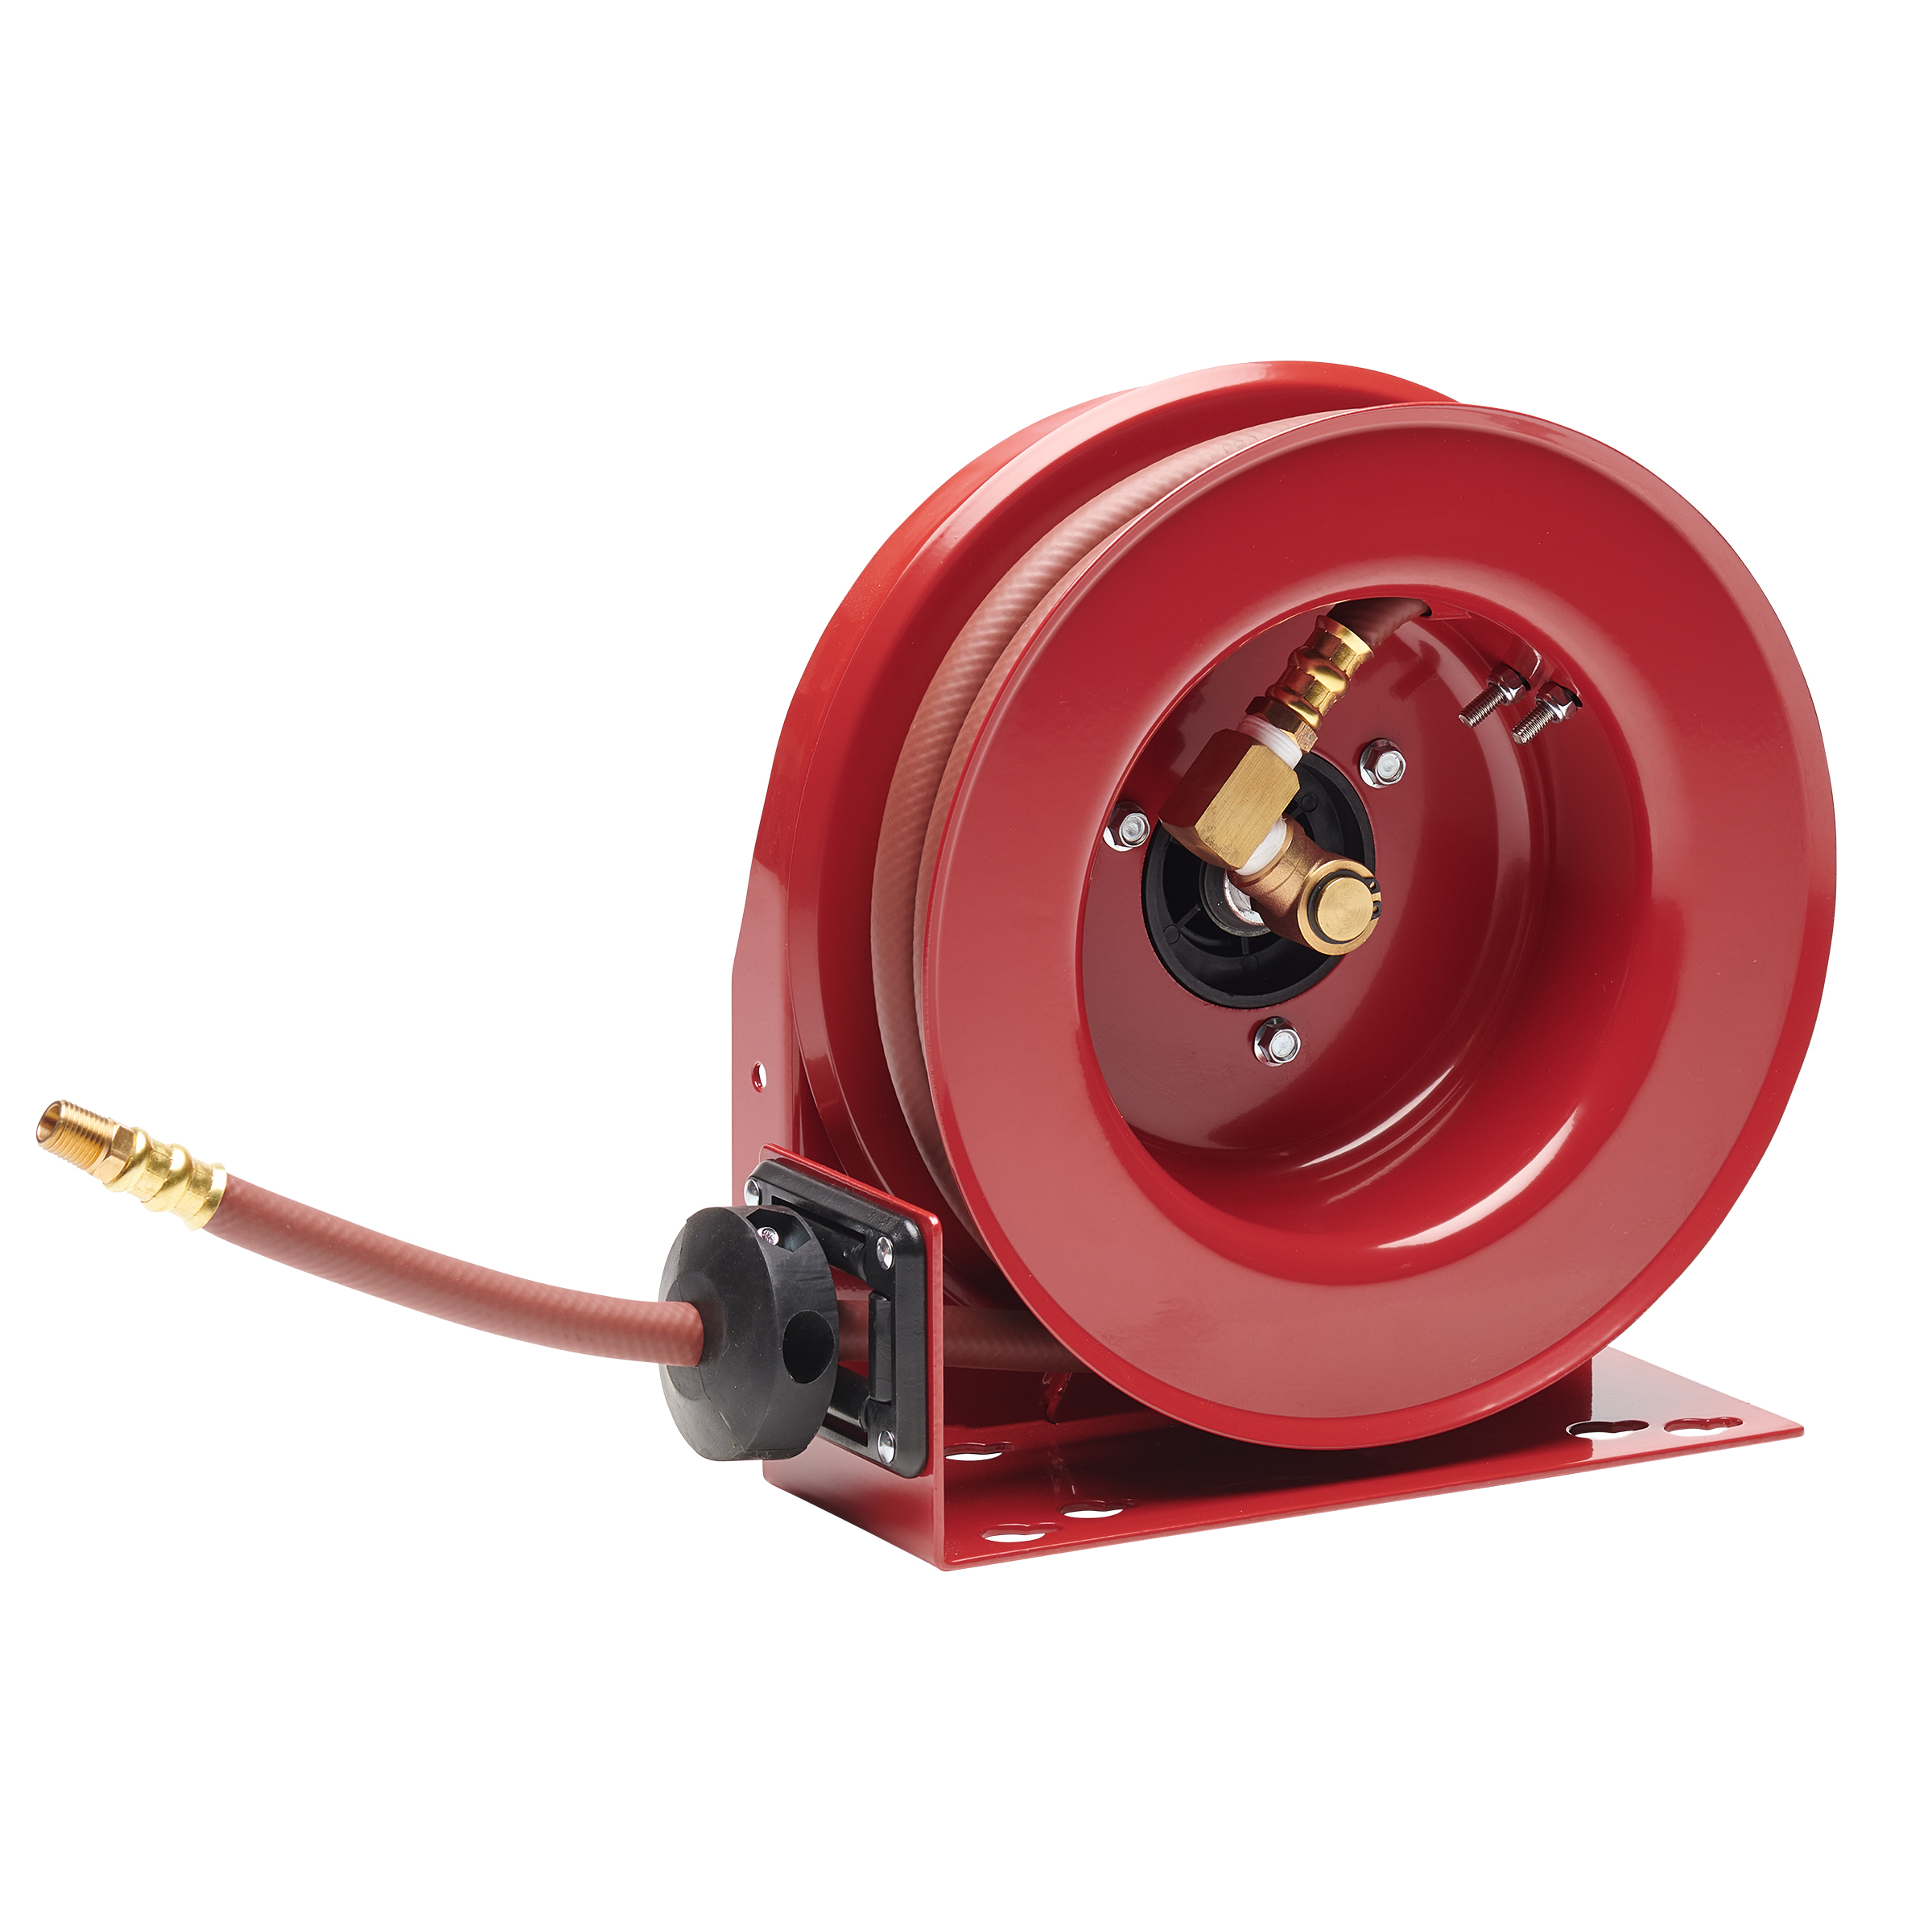 Reelcraft B3620 OLP - 3/8 in. x 20 ft. Premium Duty Ultra-Compact Hose Reel